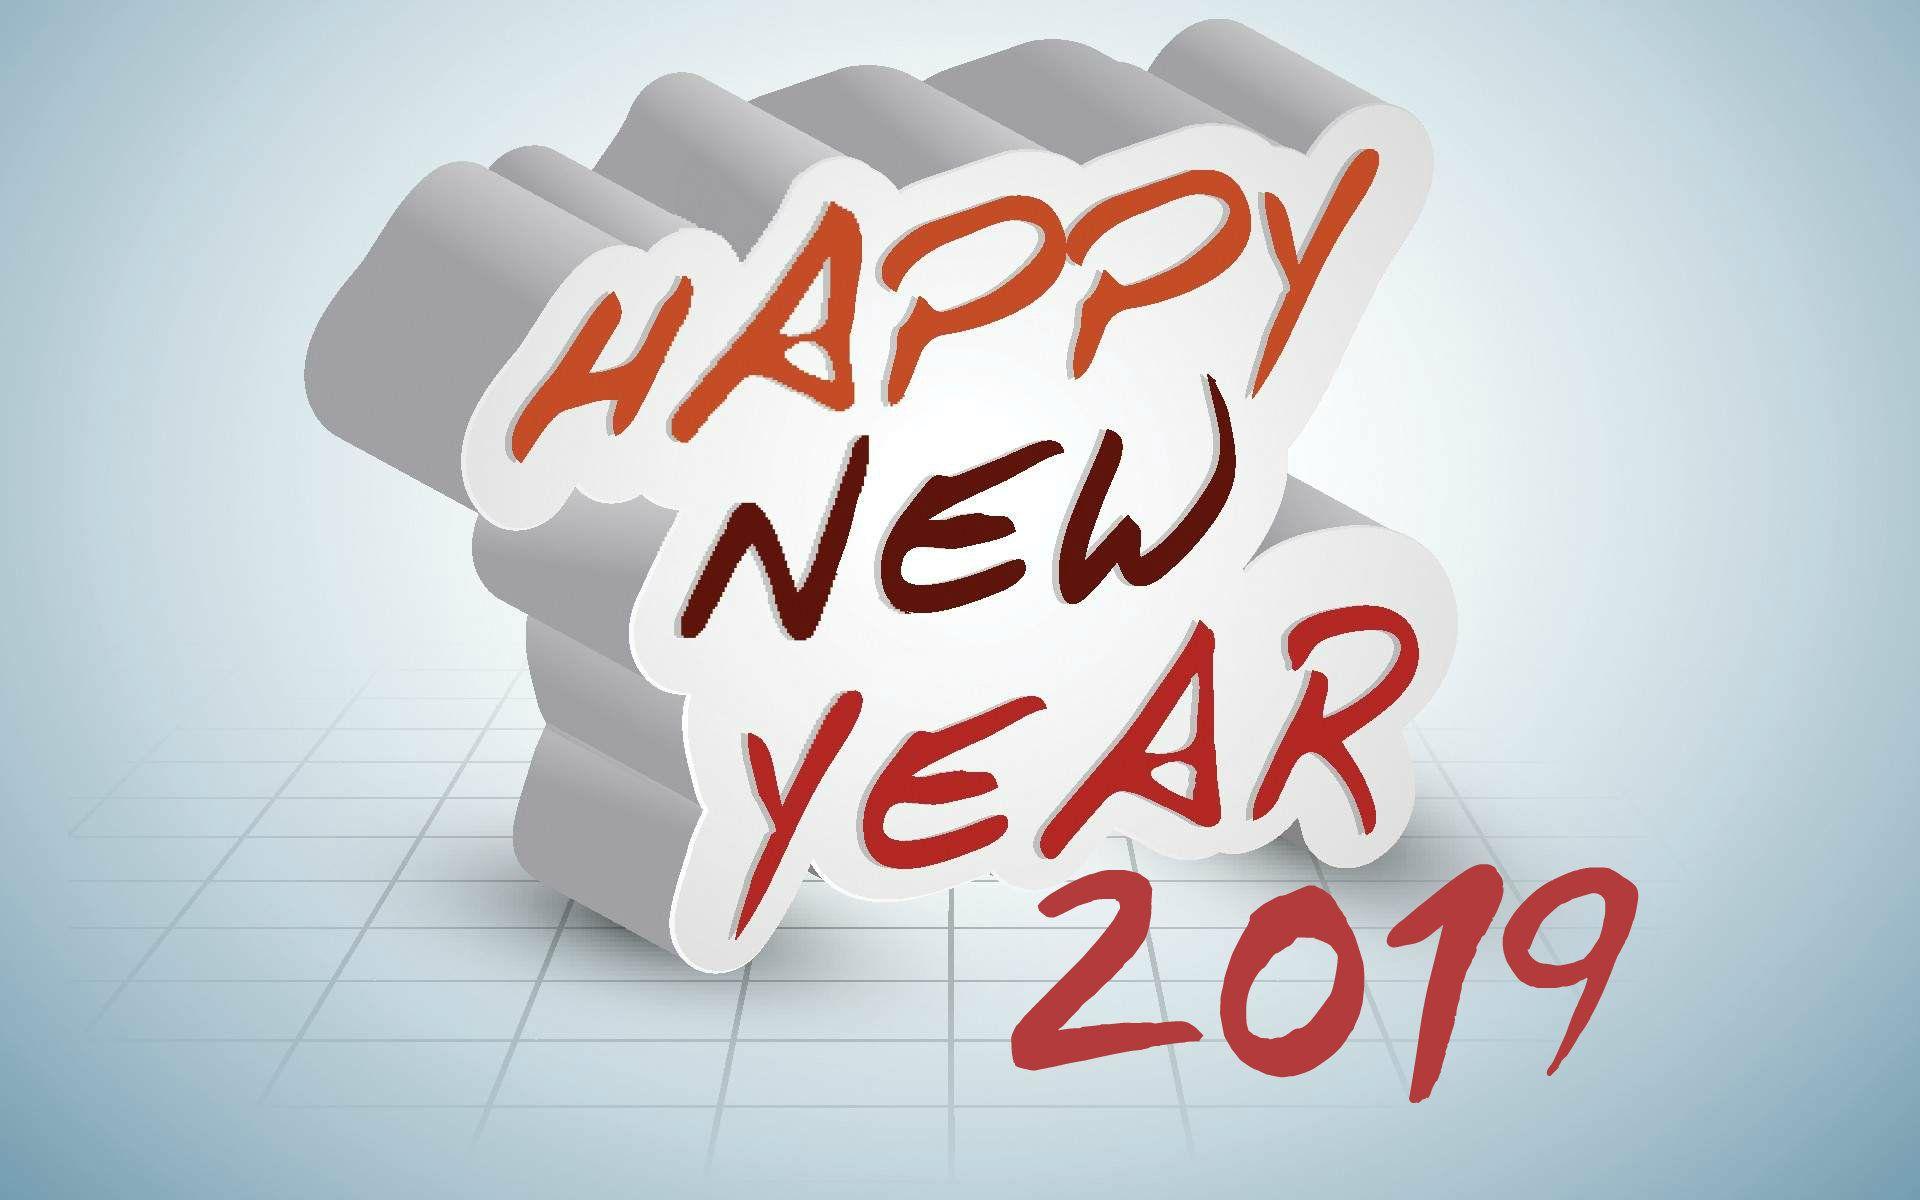 Goodbye 2018 Welcome 2019 New Year Image, Messages & SMS